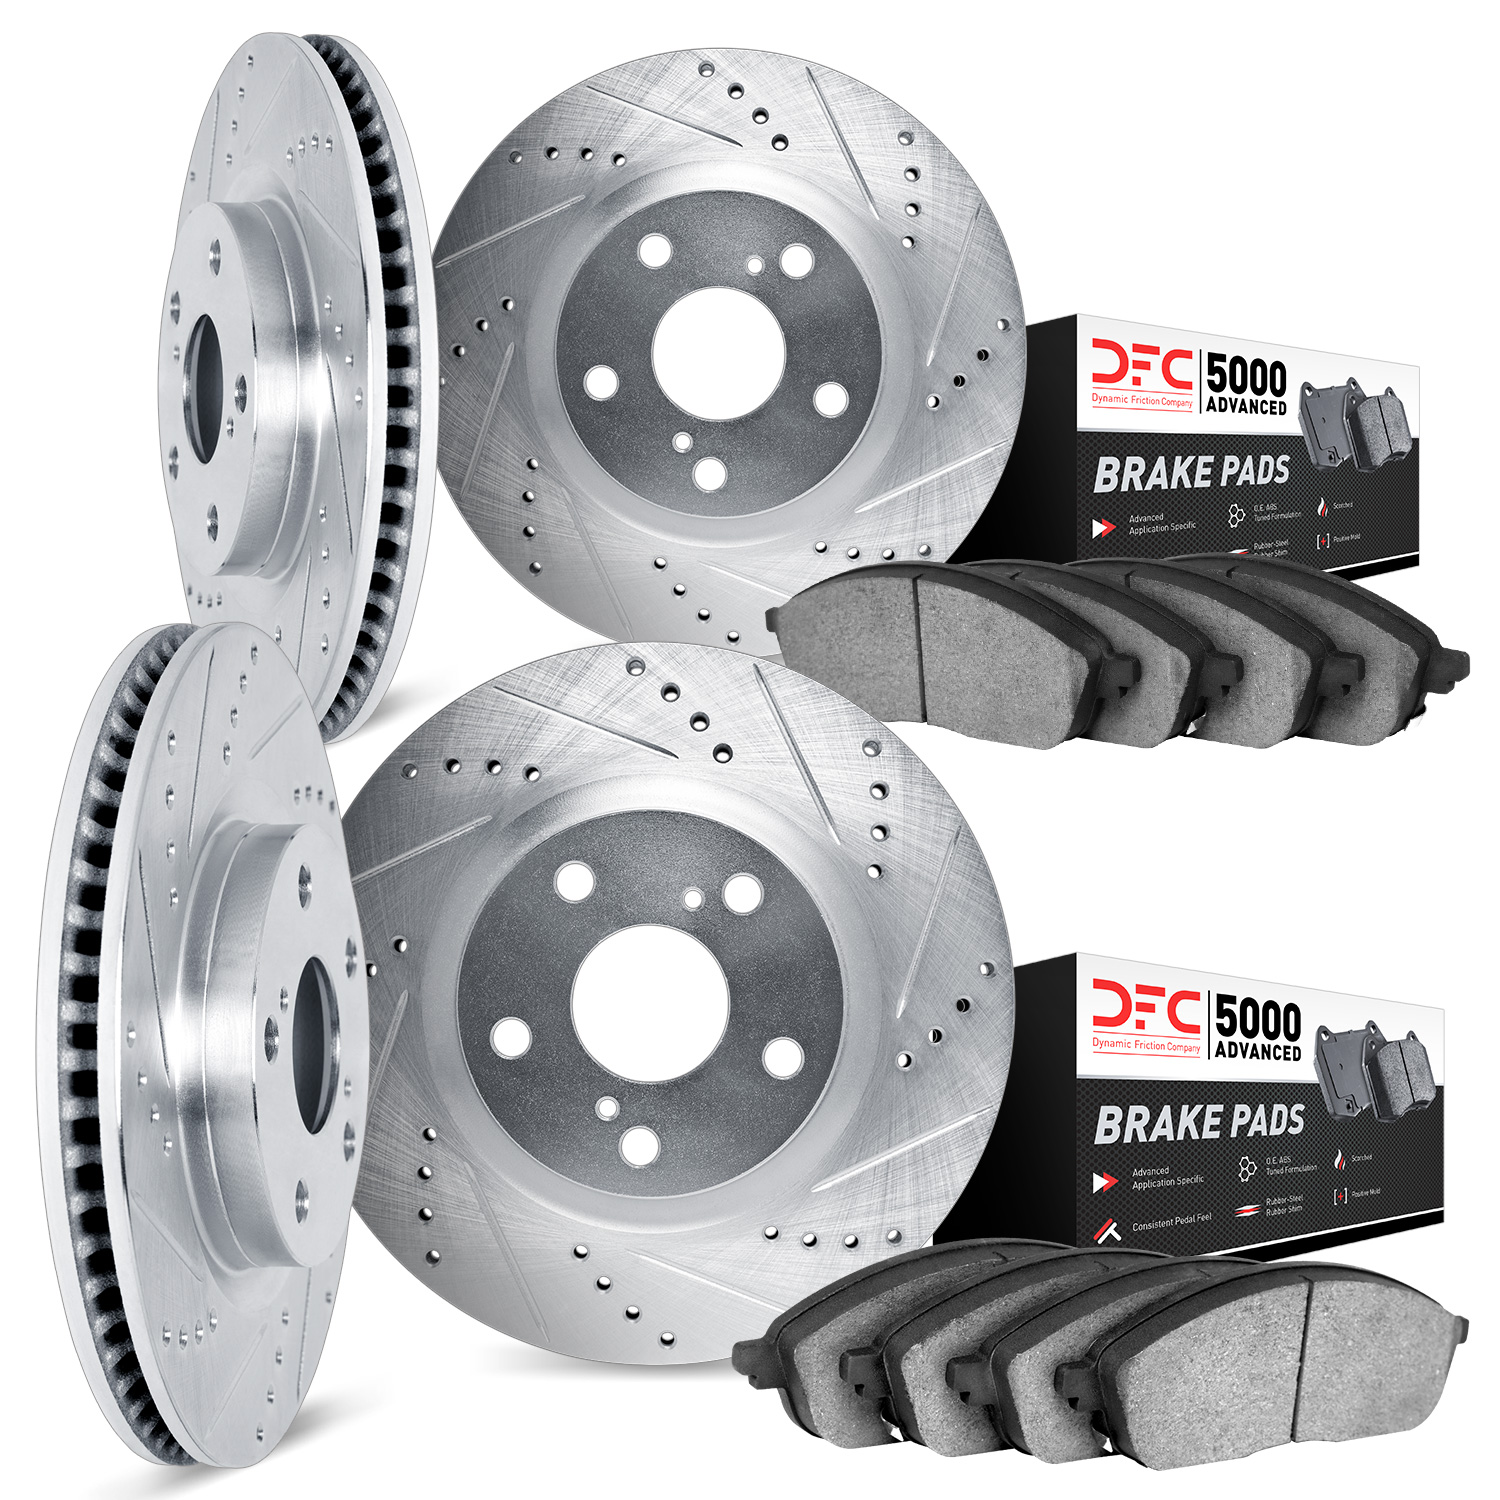 7504-47243 Drilled/Slotted Brake Rotors w/5000 Advanced Brake Pads Kit [Silver], 1963-1982 GM, Position: Front and Rear